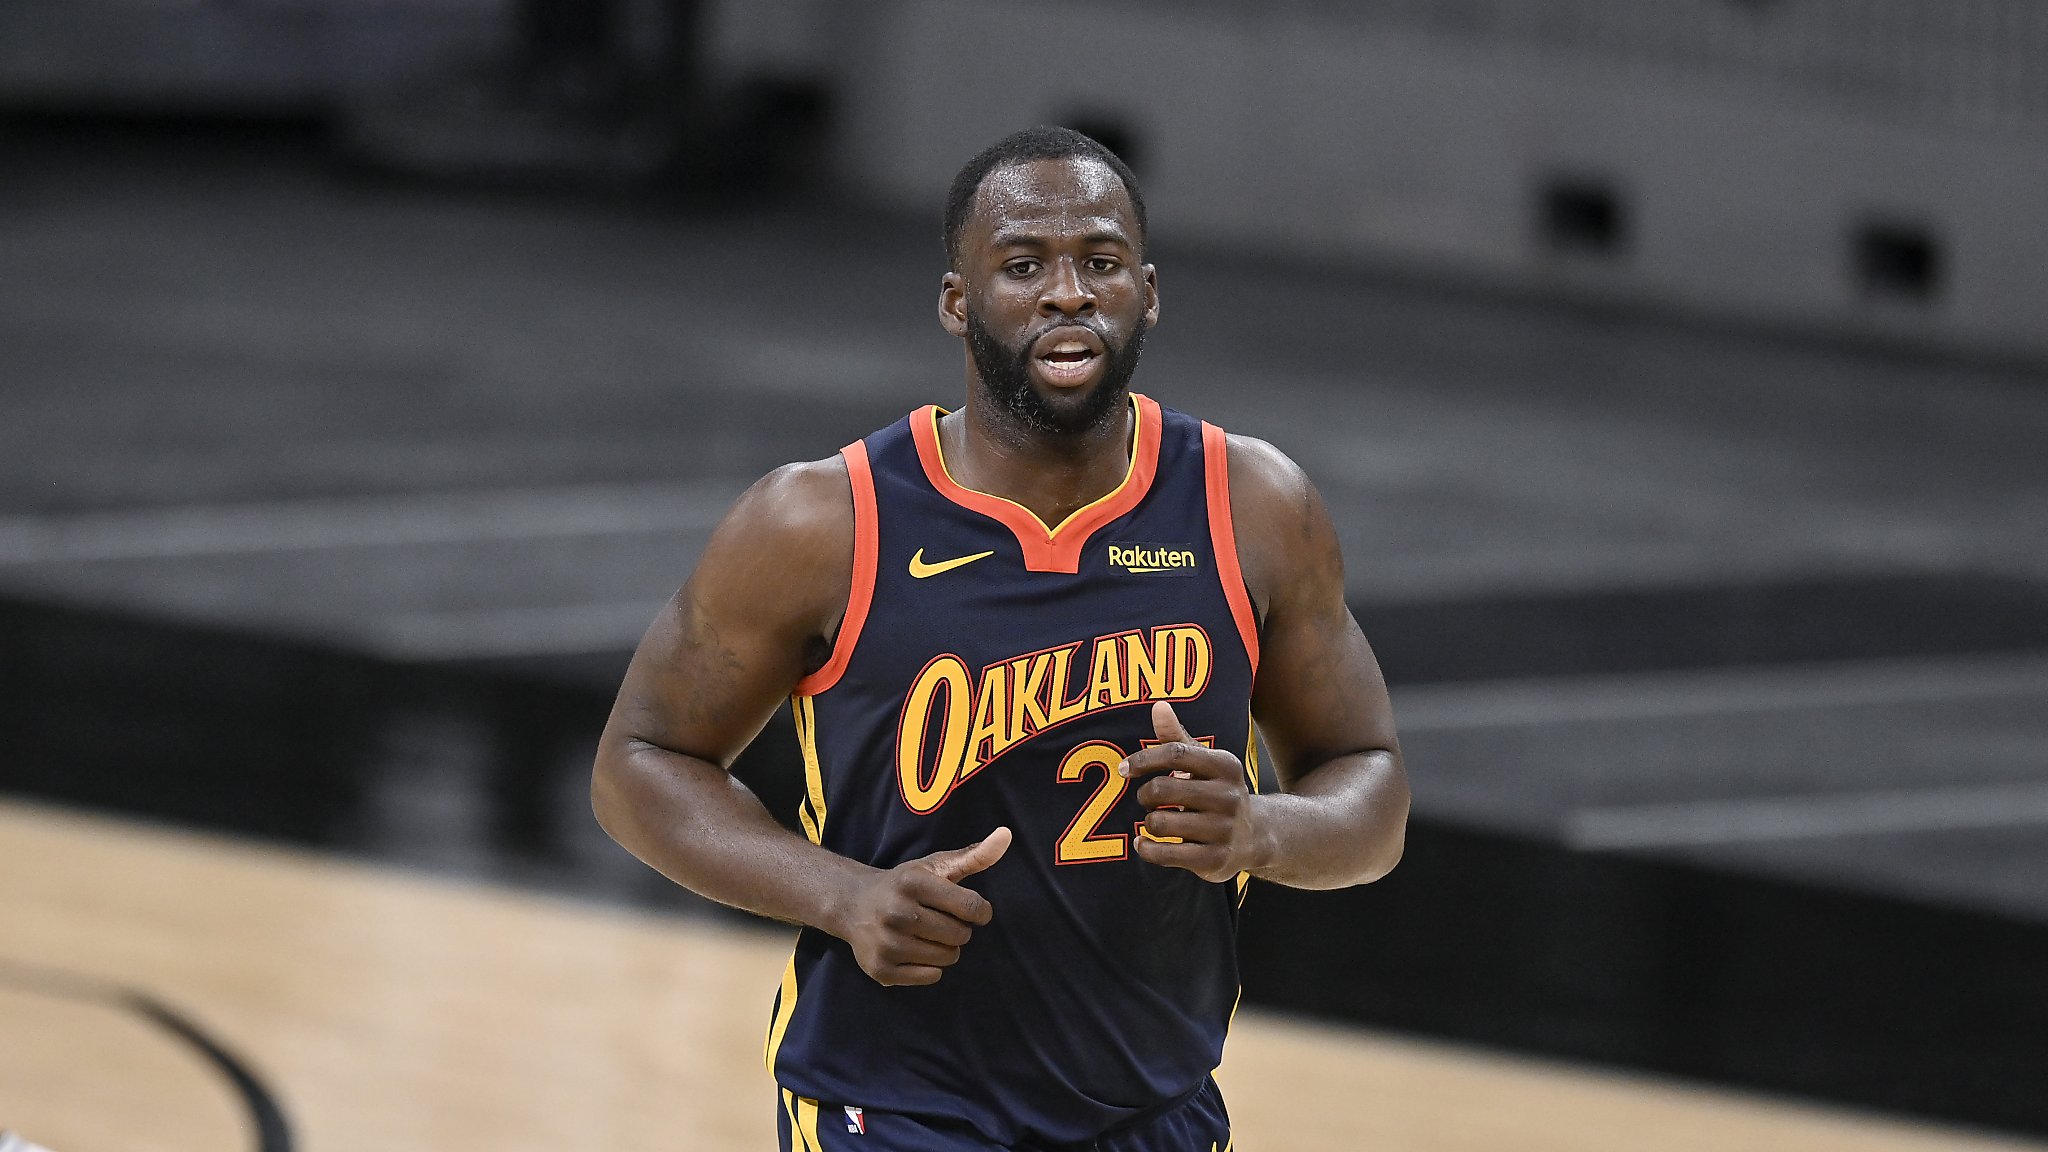 Draymond Green of Golden State Warriors mocks Cleveland Cavaliers with  'Quickie' T-shirt - ESPN